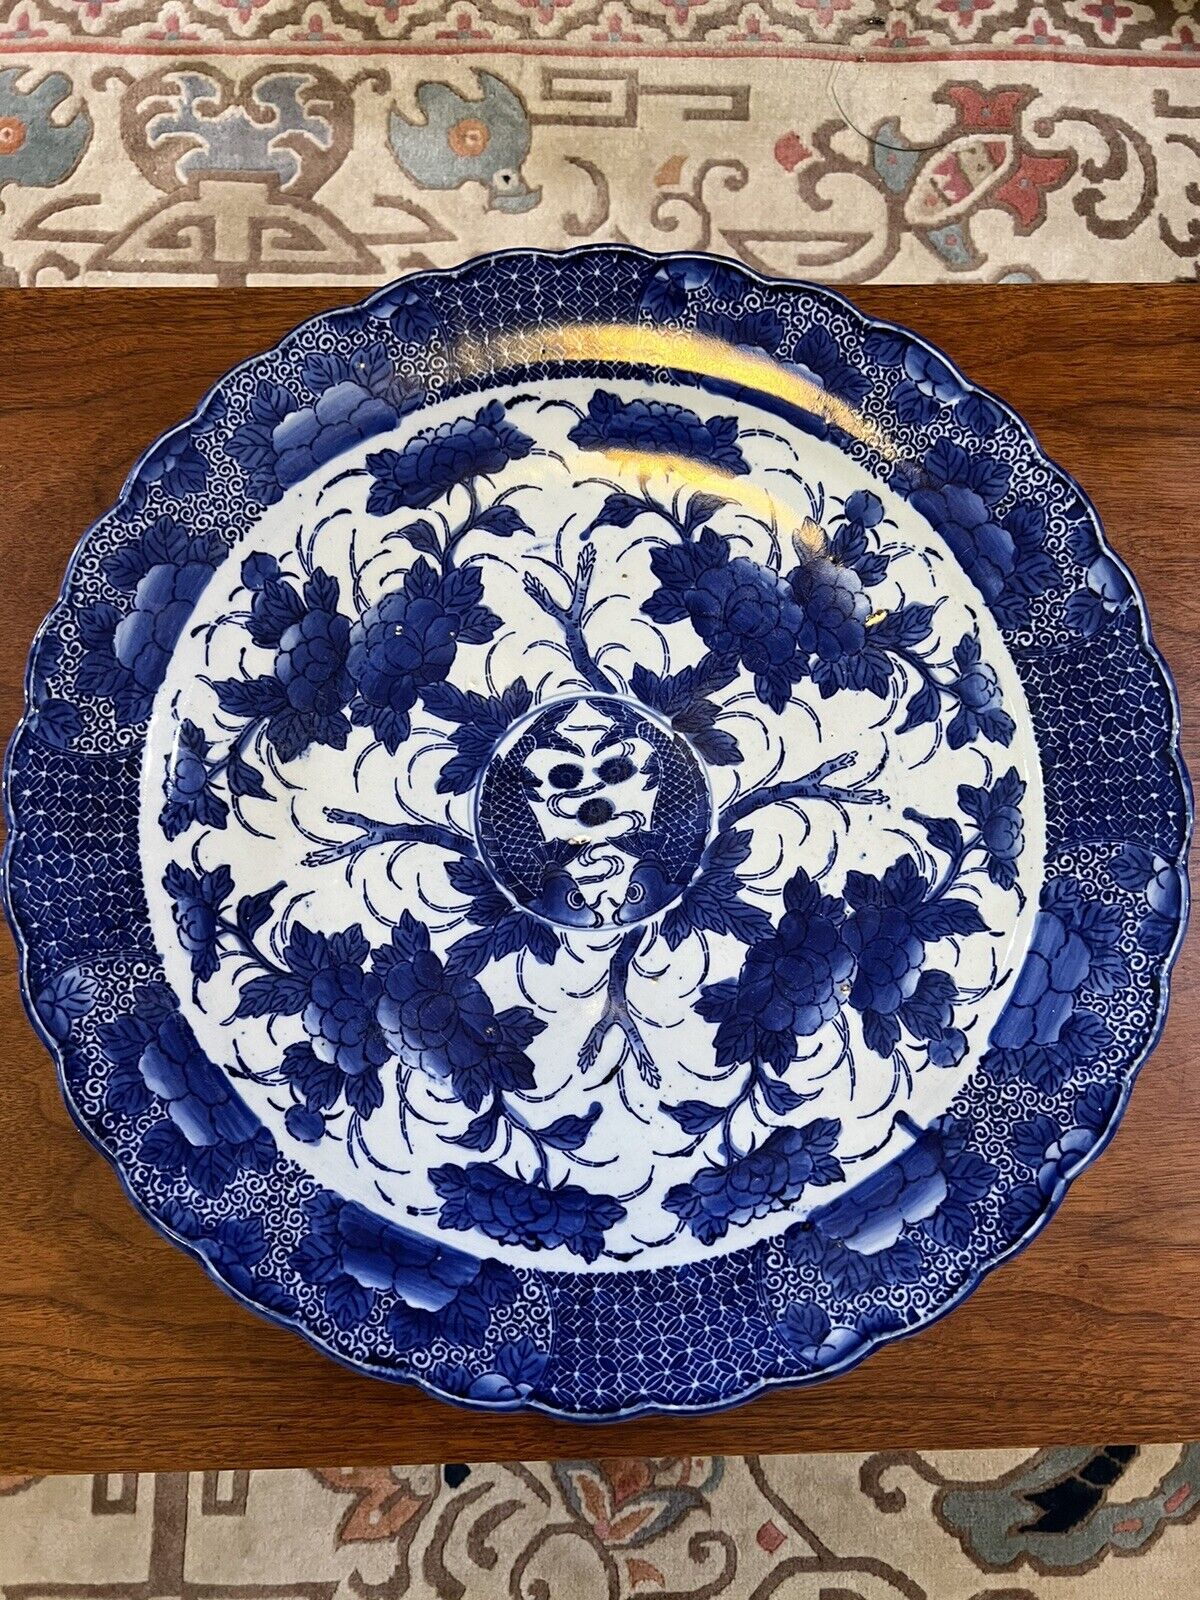 Antique Chinese blue and white 18” Large Wall Plate Charger Scalloped Edges Koi